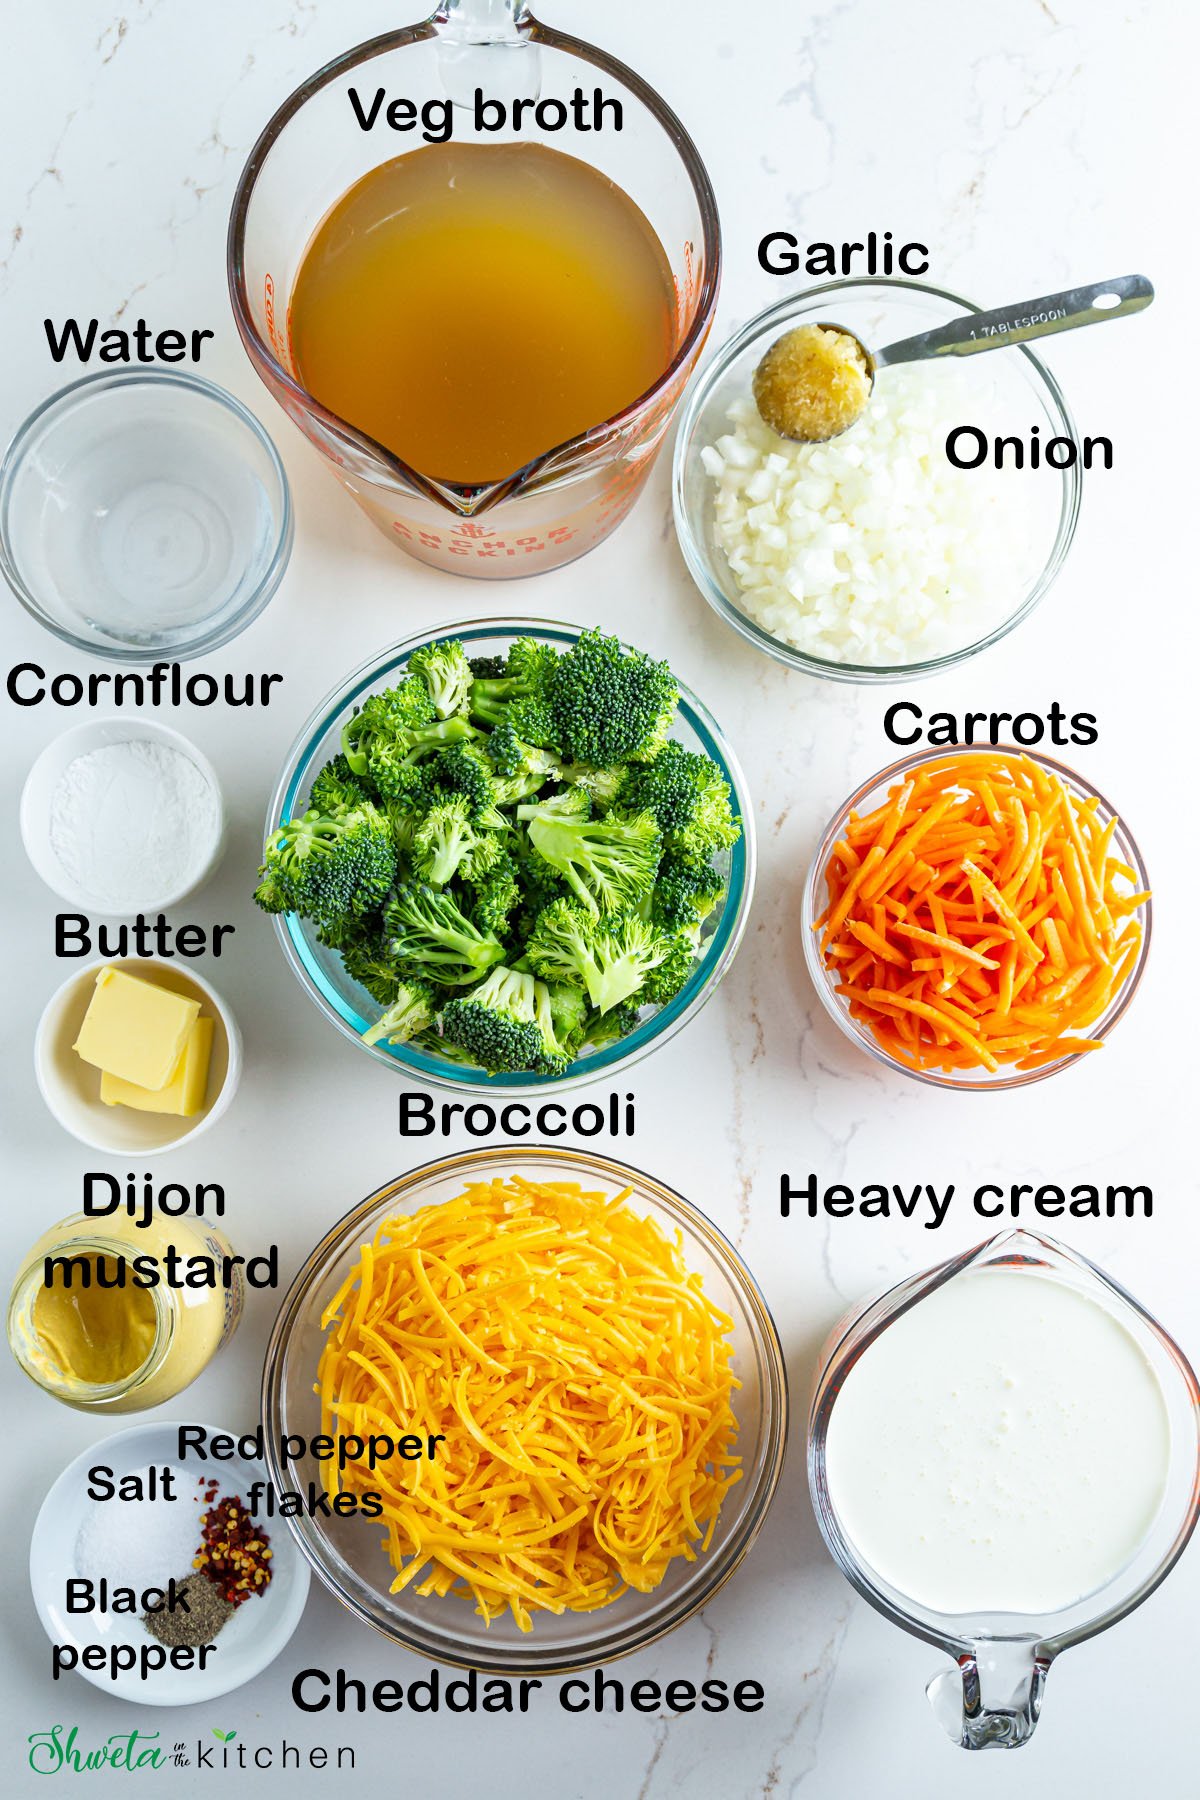 Ingredients for broccoli cheddar soup in bowls on white surface